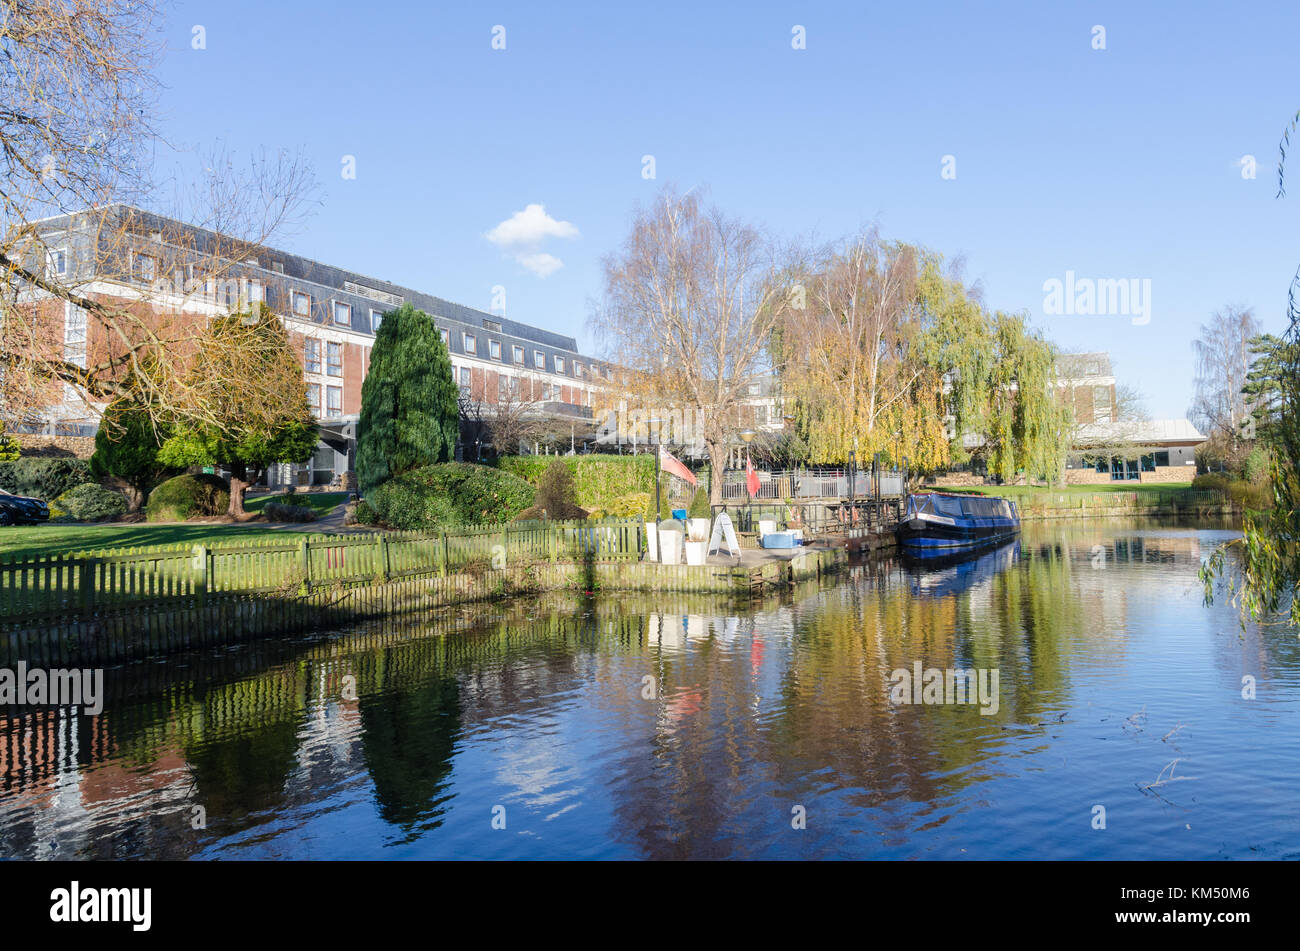 The Crowne Plaza Hotel on the banks of the River Avon in Stratford-upon-Avon, Warwickshire, UK Stock Photo